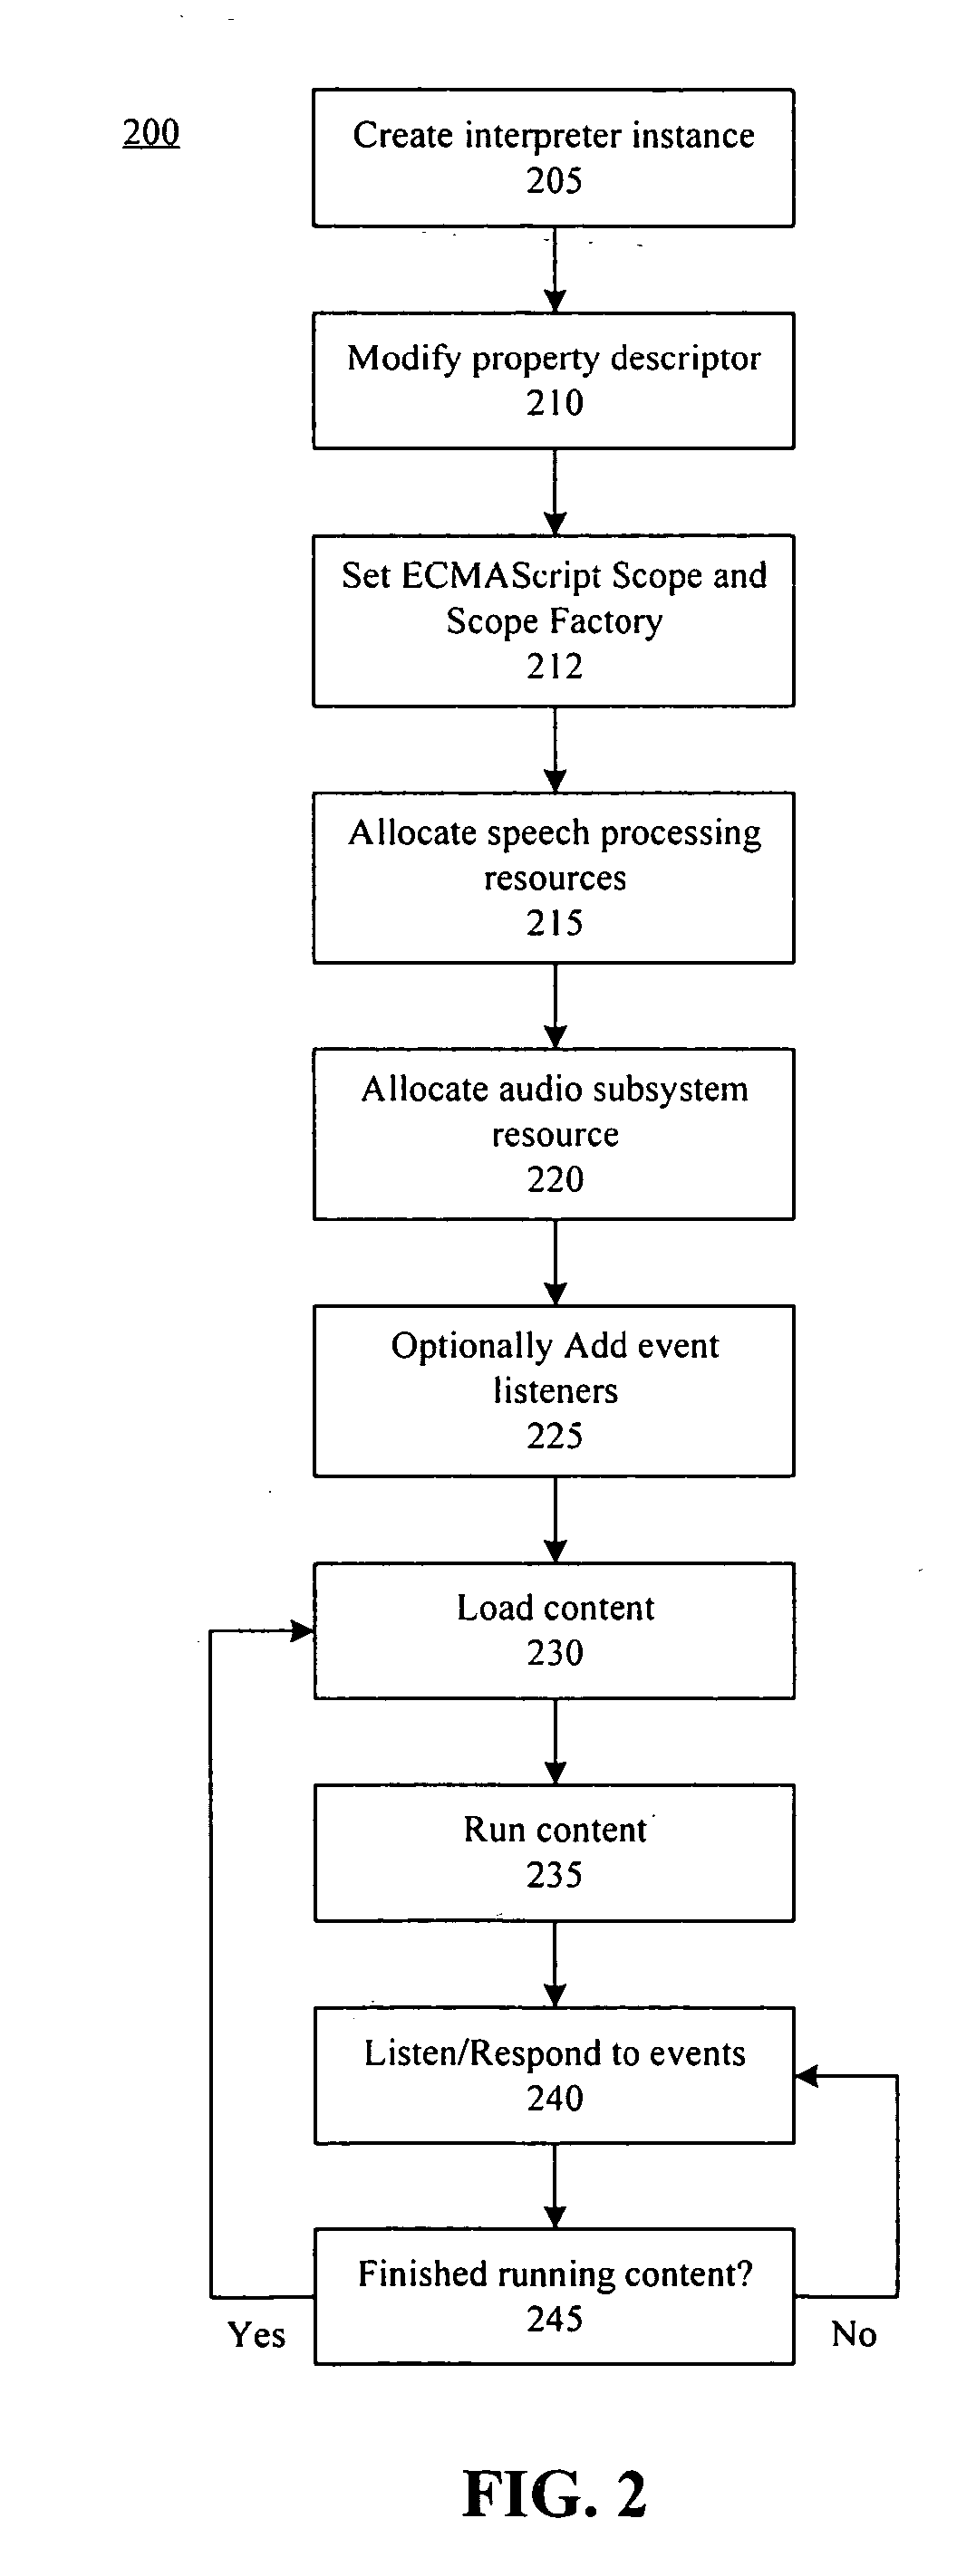 Method, system, and apparatus for a voice markup language interpreter and voice browser